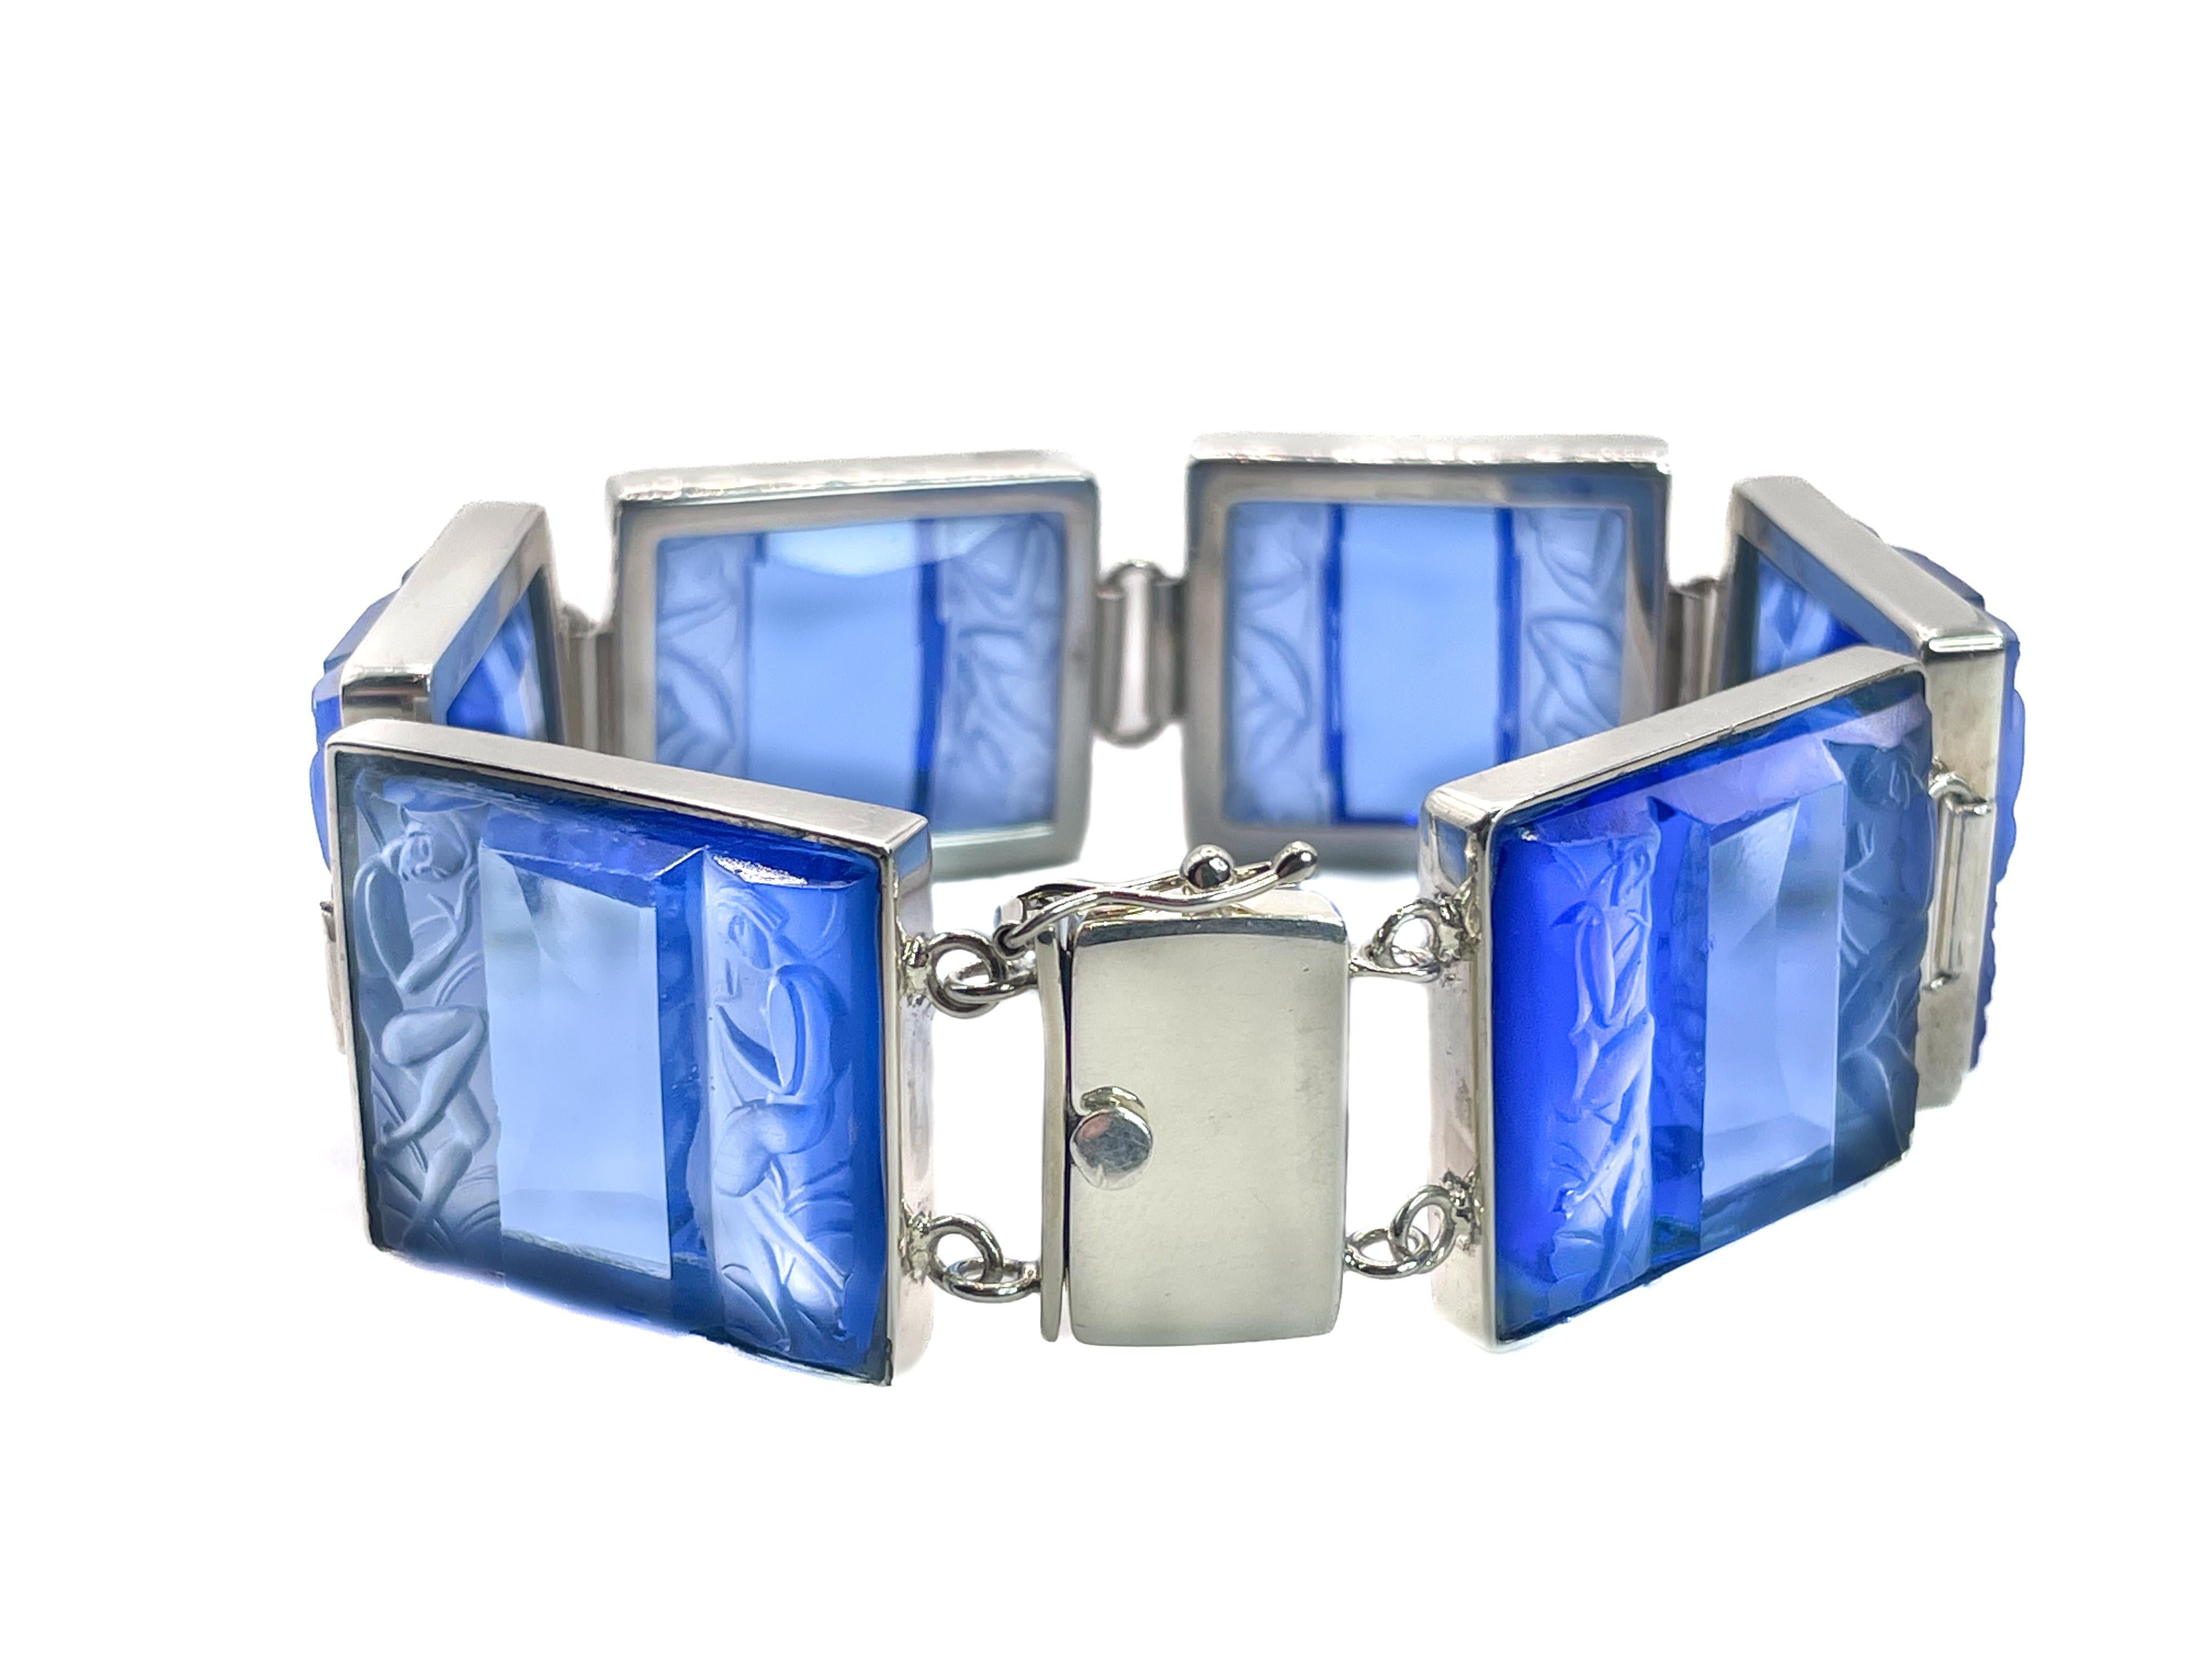 This timeless, glamour bracelet is made from original blue Art Deco glass panels. The glass features an elegant molded motif of two stylized Art Deco nude women. 

The Art Deco movement reflected a love of modernity, sleek lines, and graceful